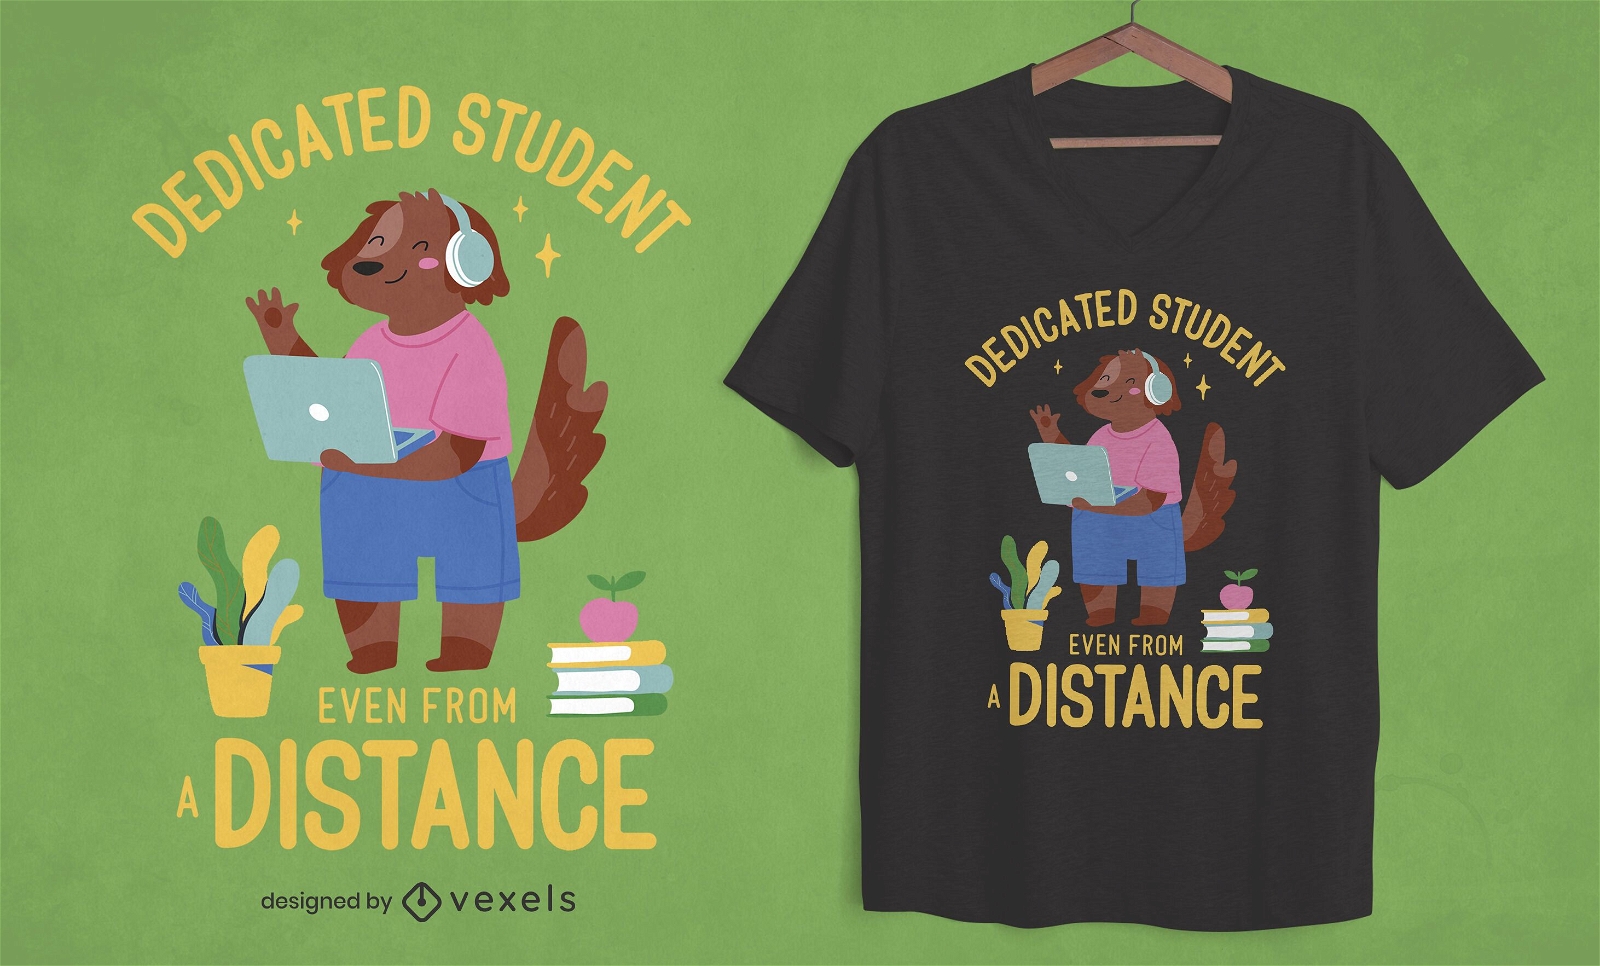 Student from a distance t-shirt design